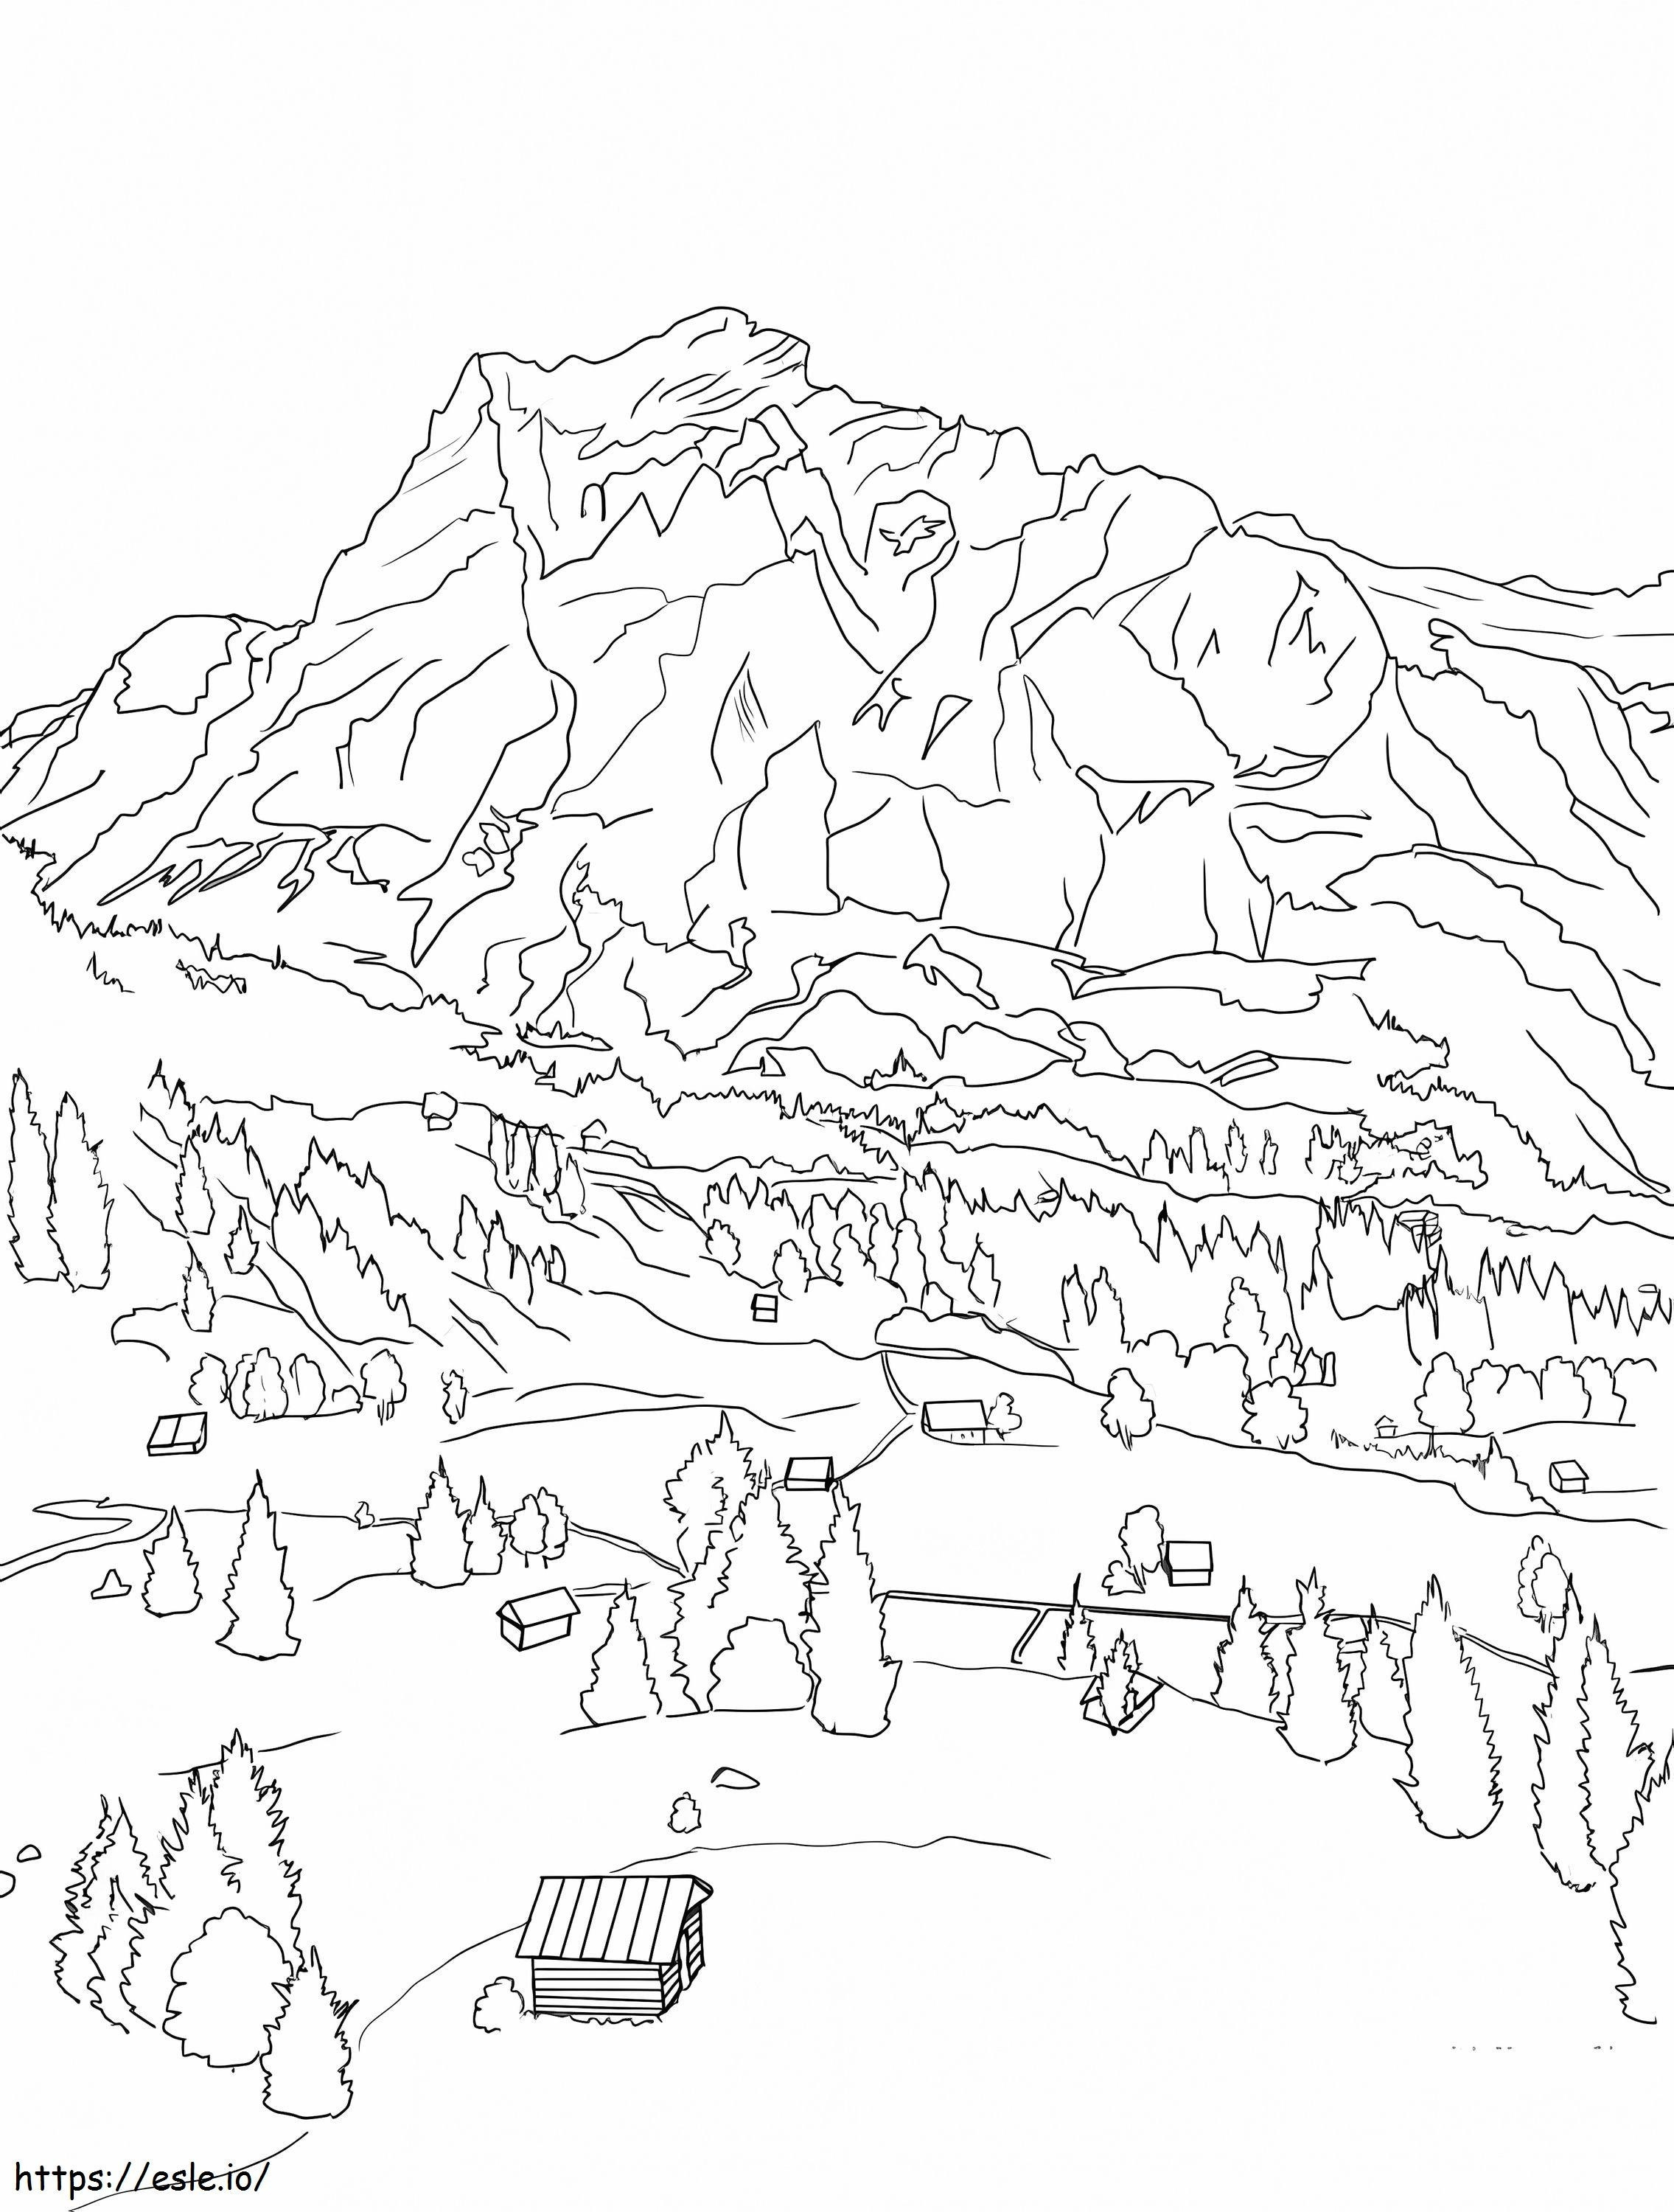 Swiss Alps coloring page